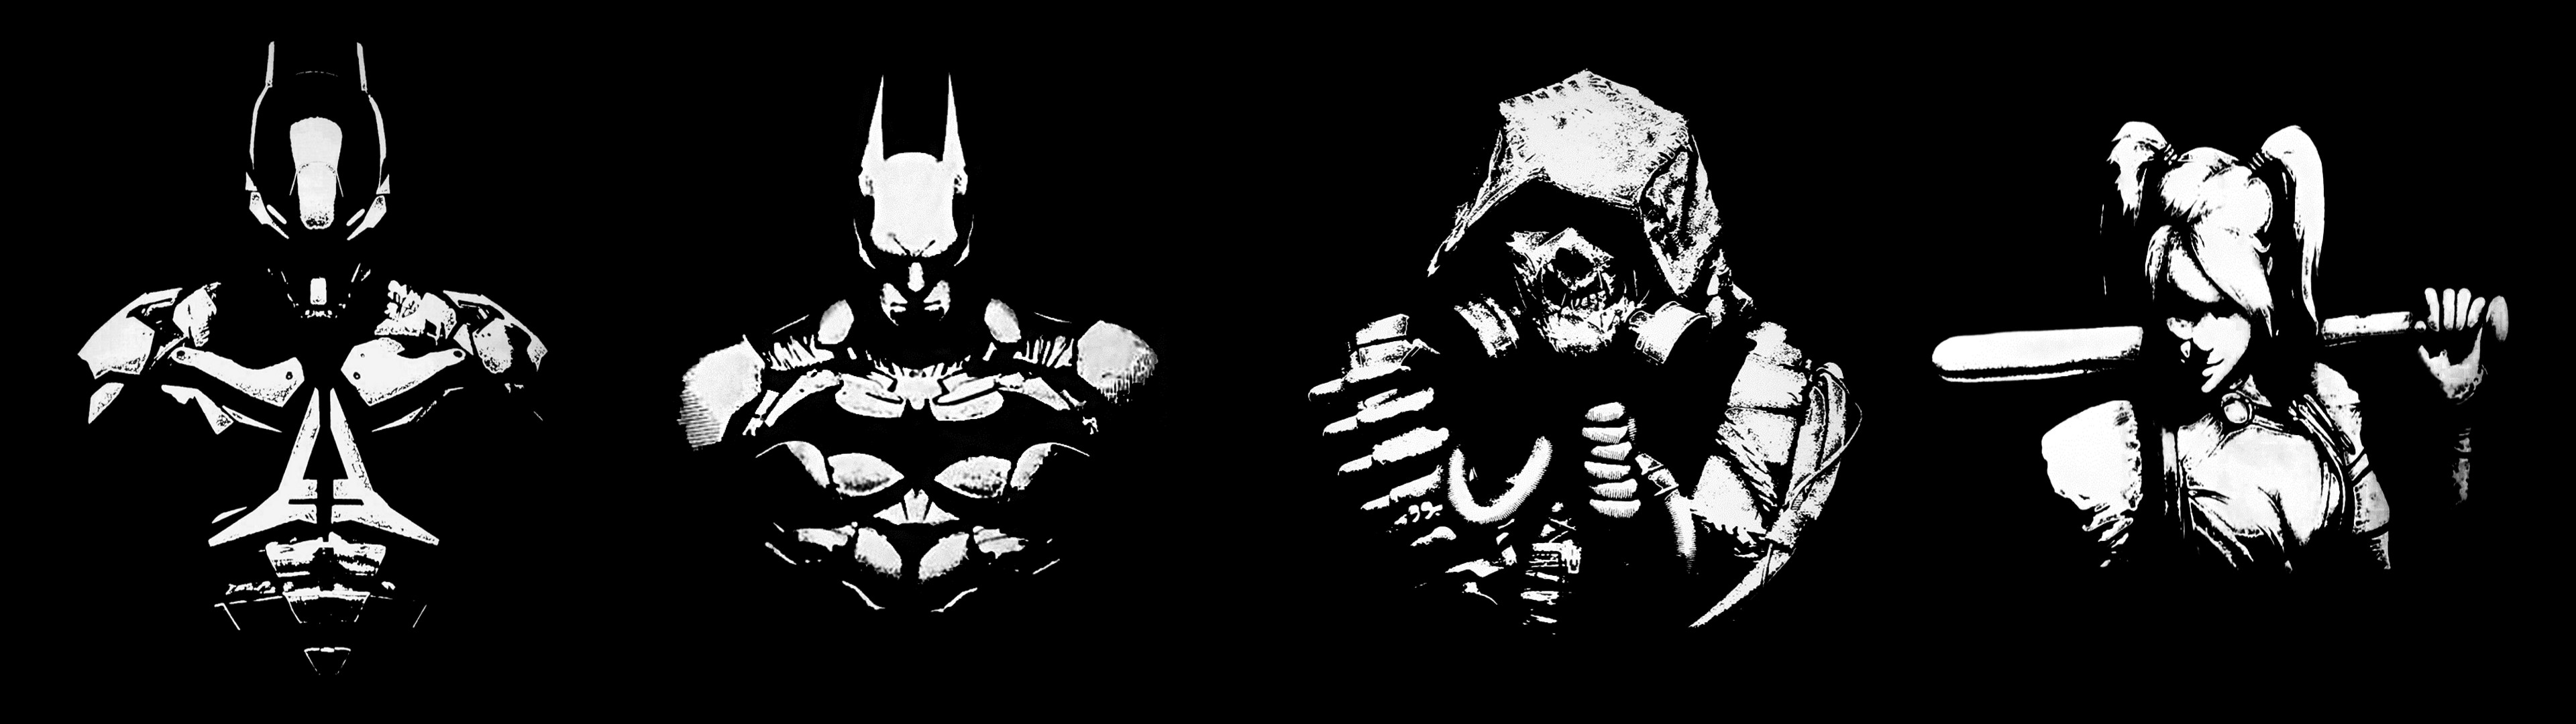 3840x1080 ] I edited four Batman Arkham wallpapers into one for .